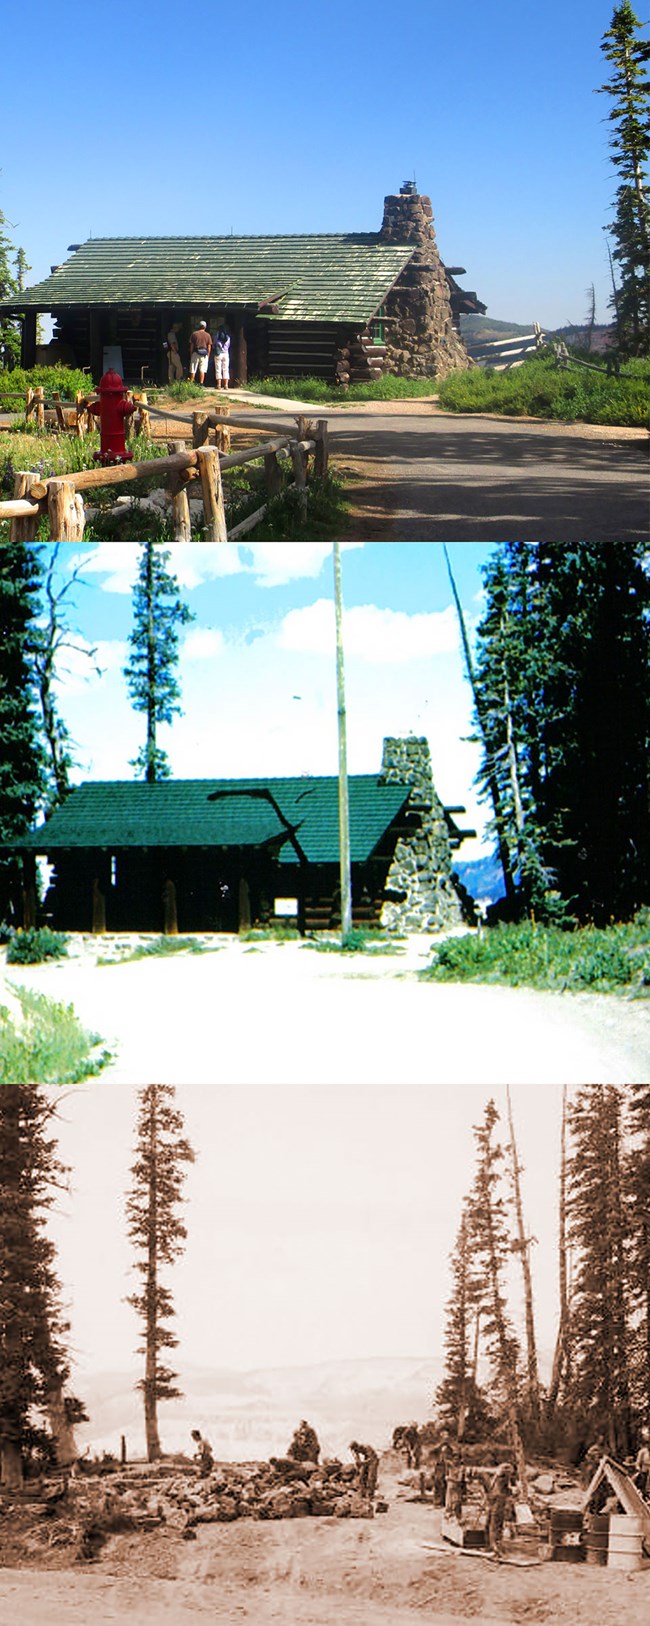 The Cedar Breaks Museum over time. Top: Modern time, this building is currently known as the information center, Middle: 1960's era Museum building, Bottom: CCC crew constructing the museum in the 1930's